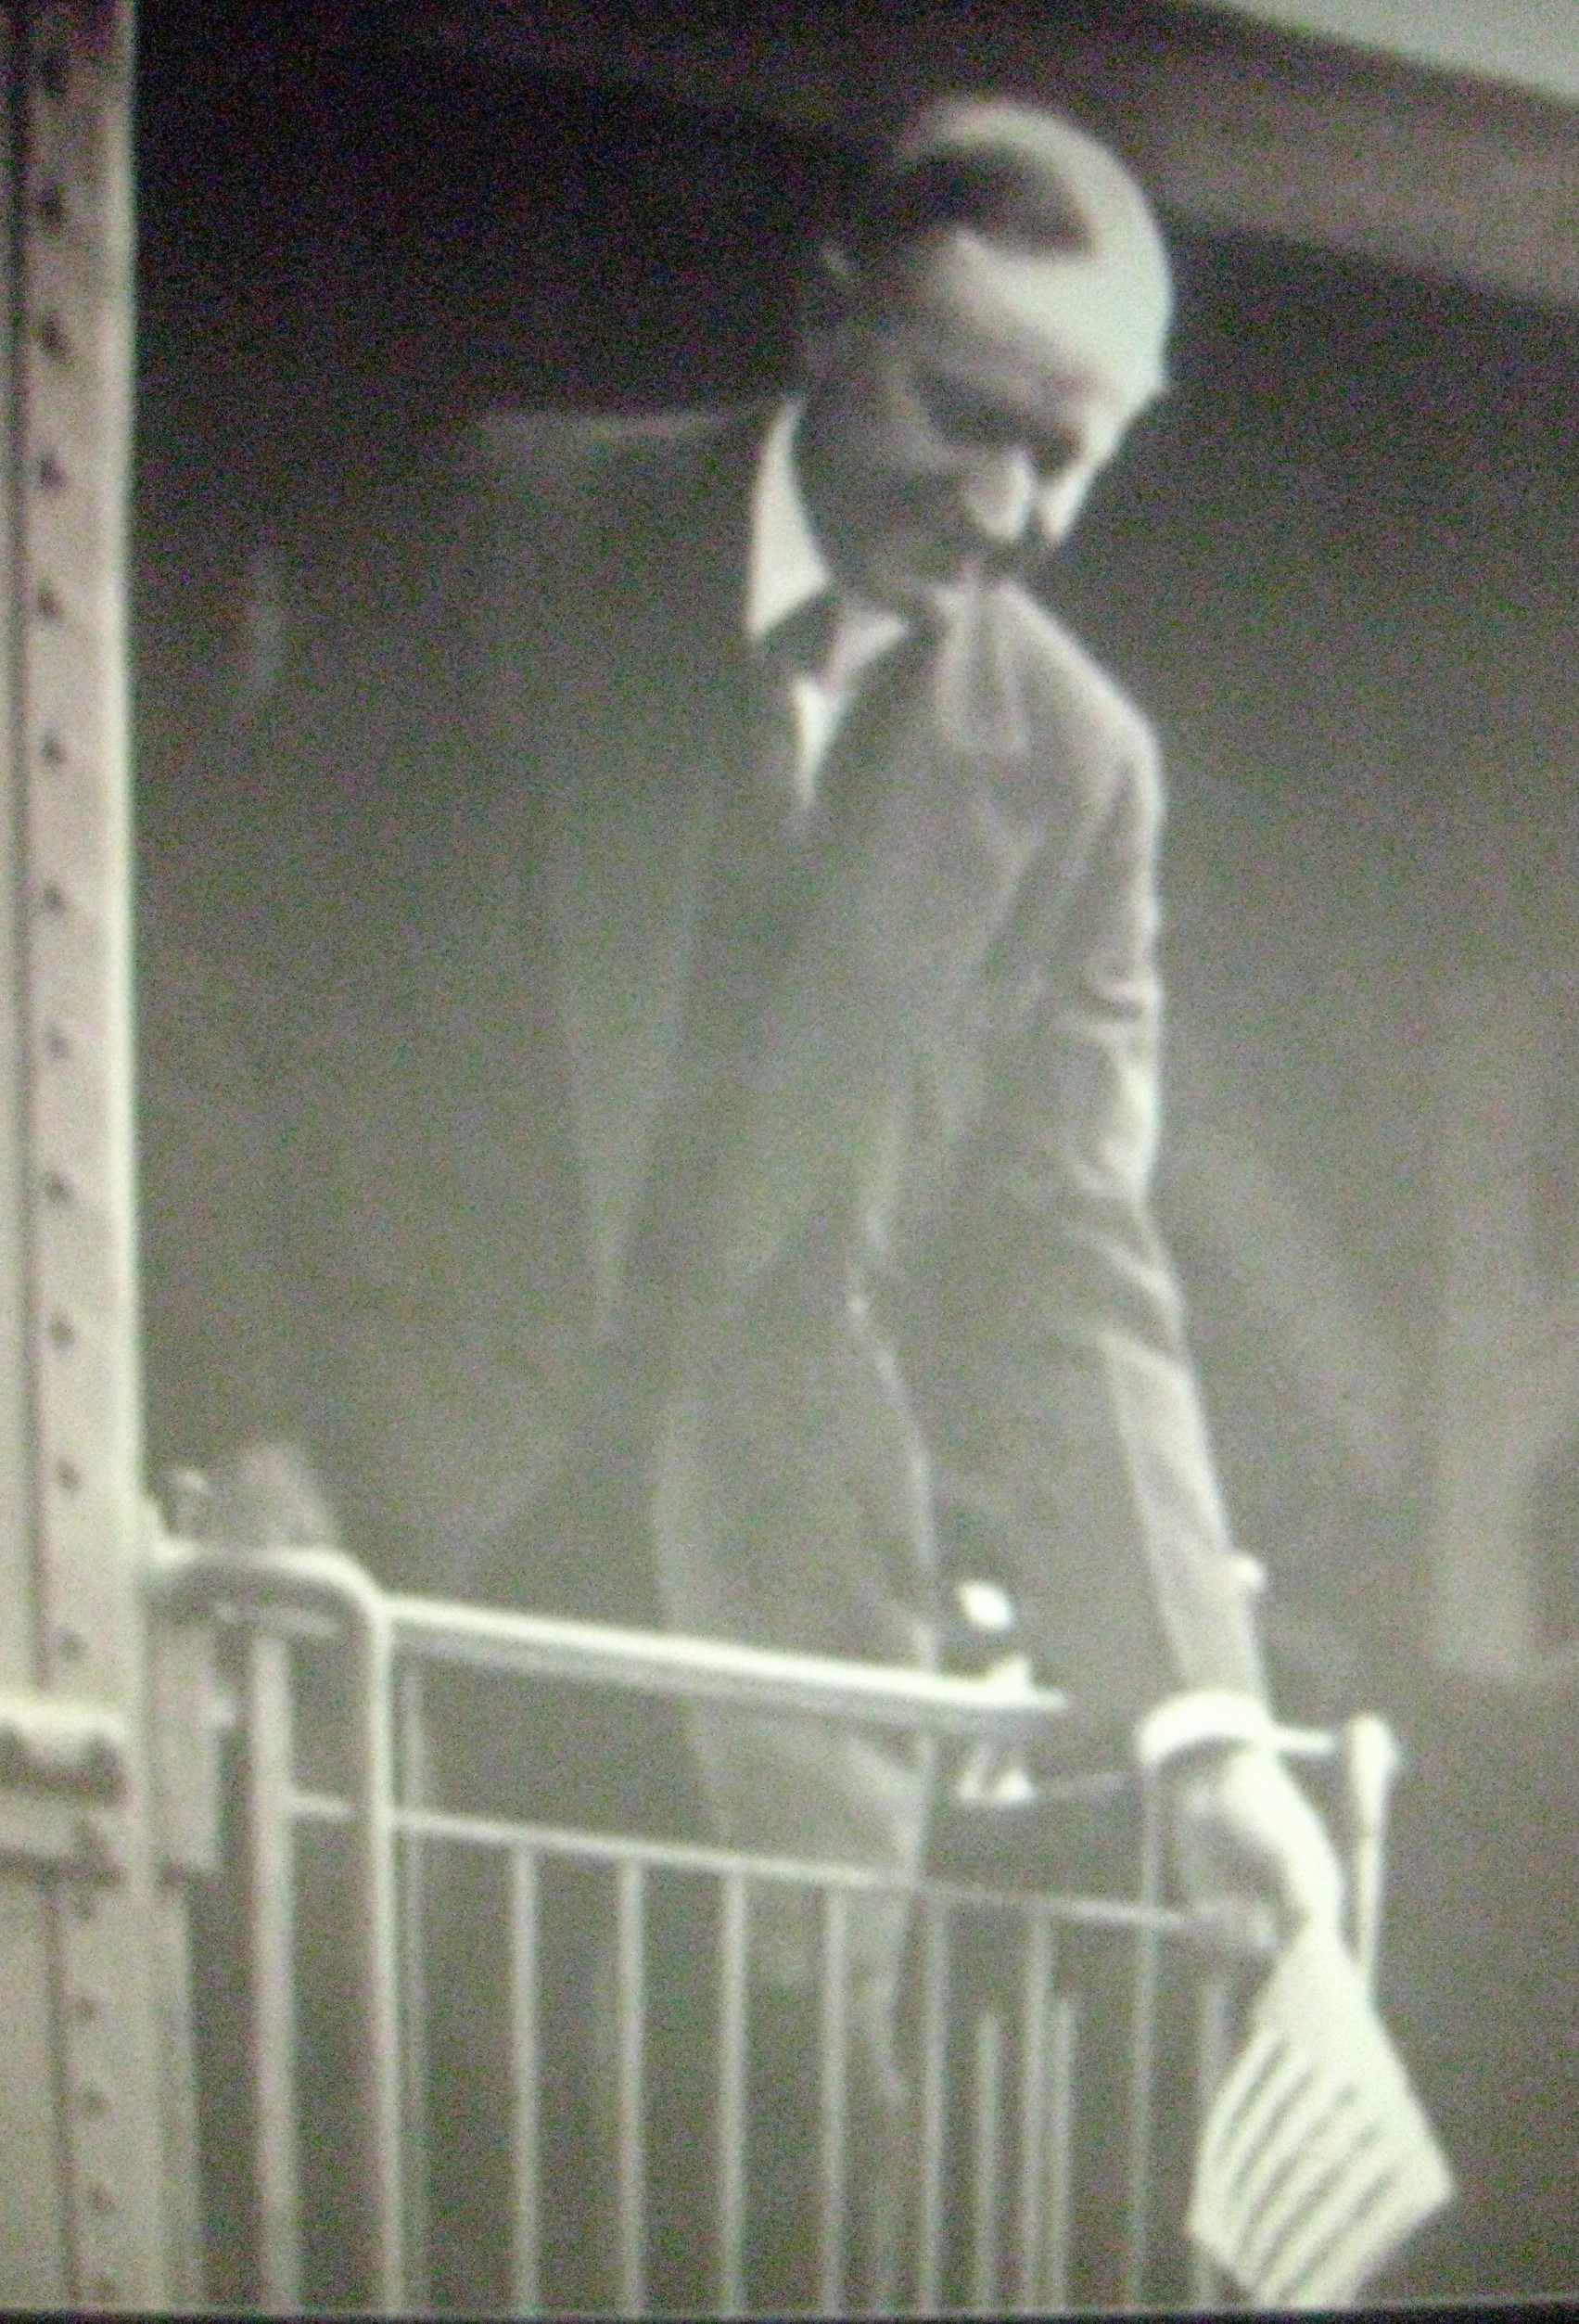 Coolidge greeted a voter from the back of his train on his return trip to Washington from his son's burial.